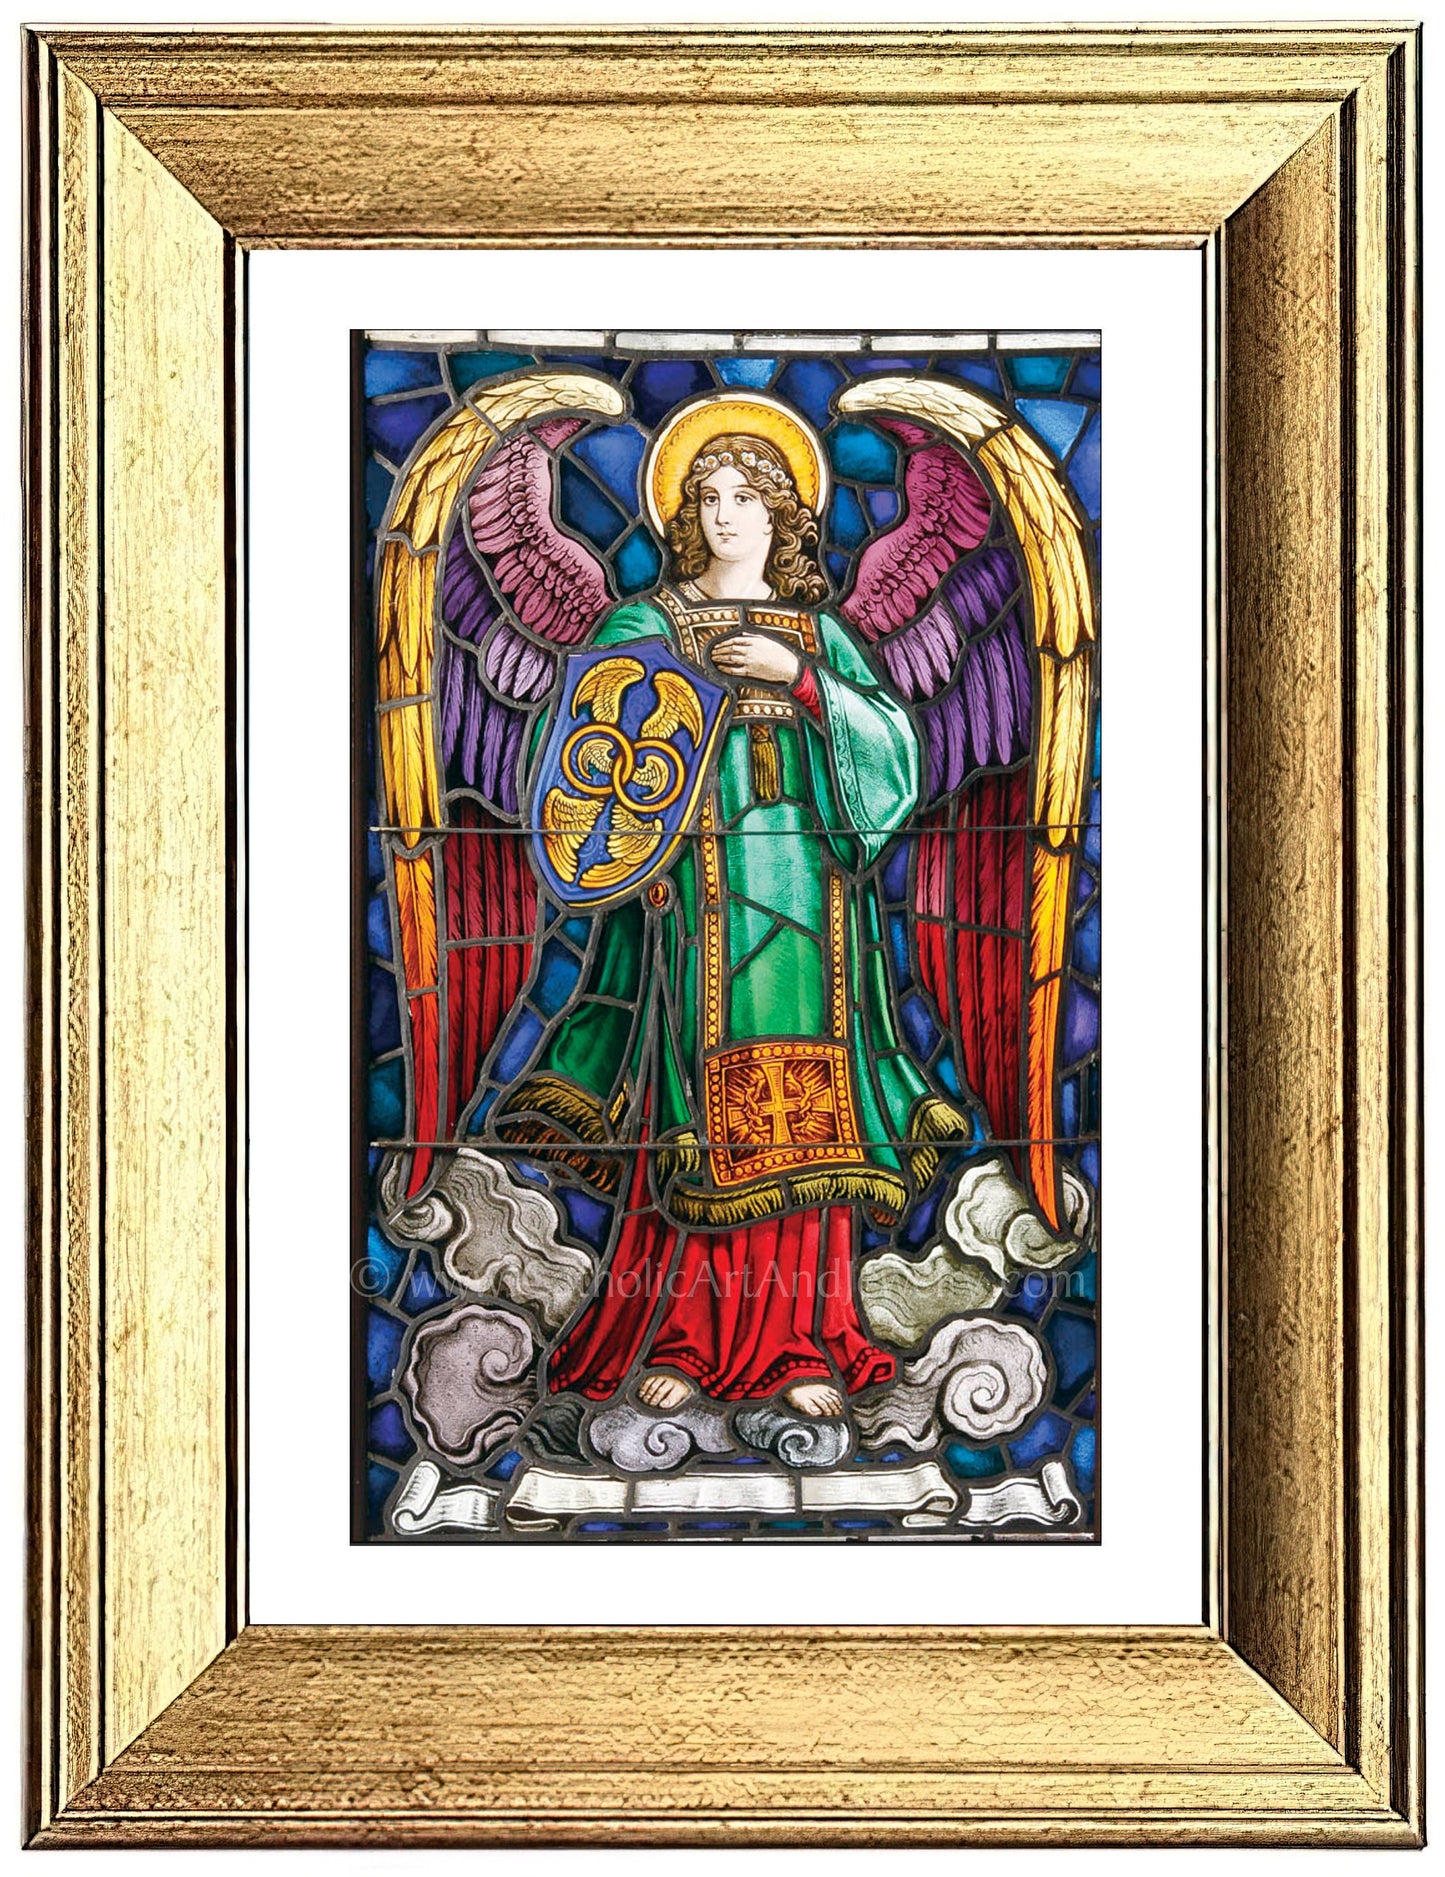 Archangel Michael – based on a Vintage Stained Glass Window – Catholic Art Print